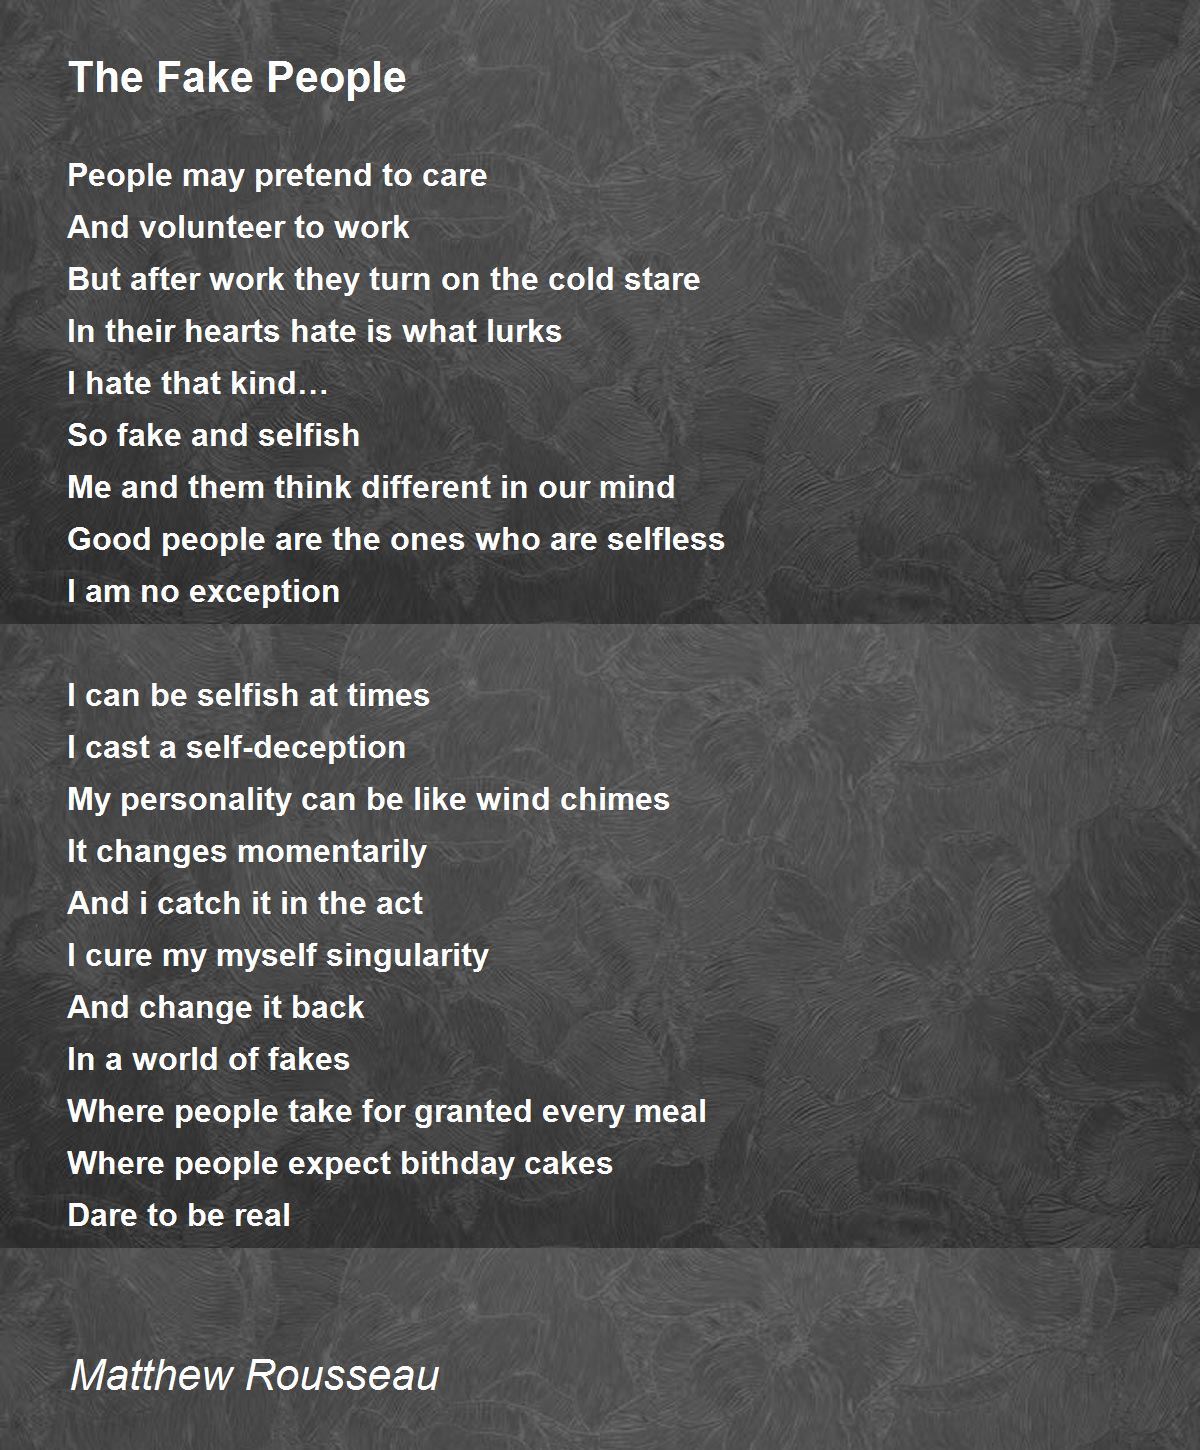 The Fake People - The Fake People Poem by Matthew Rousseau